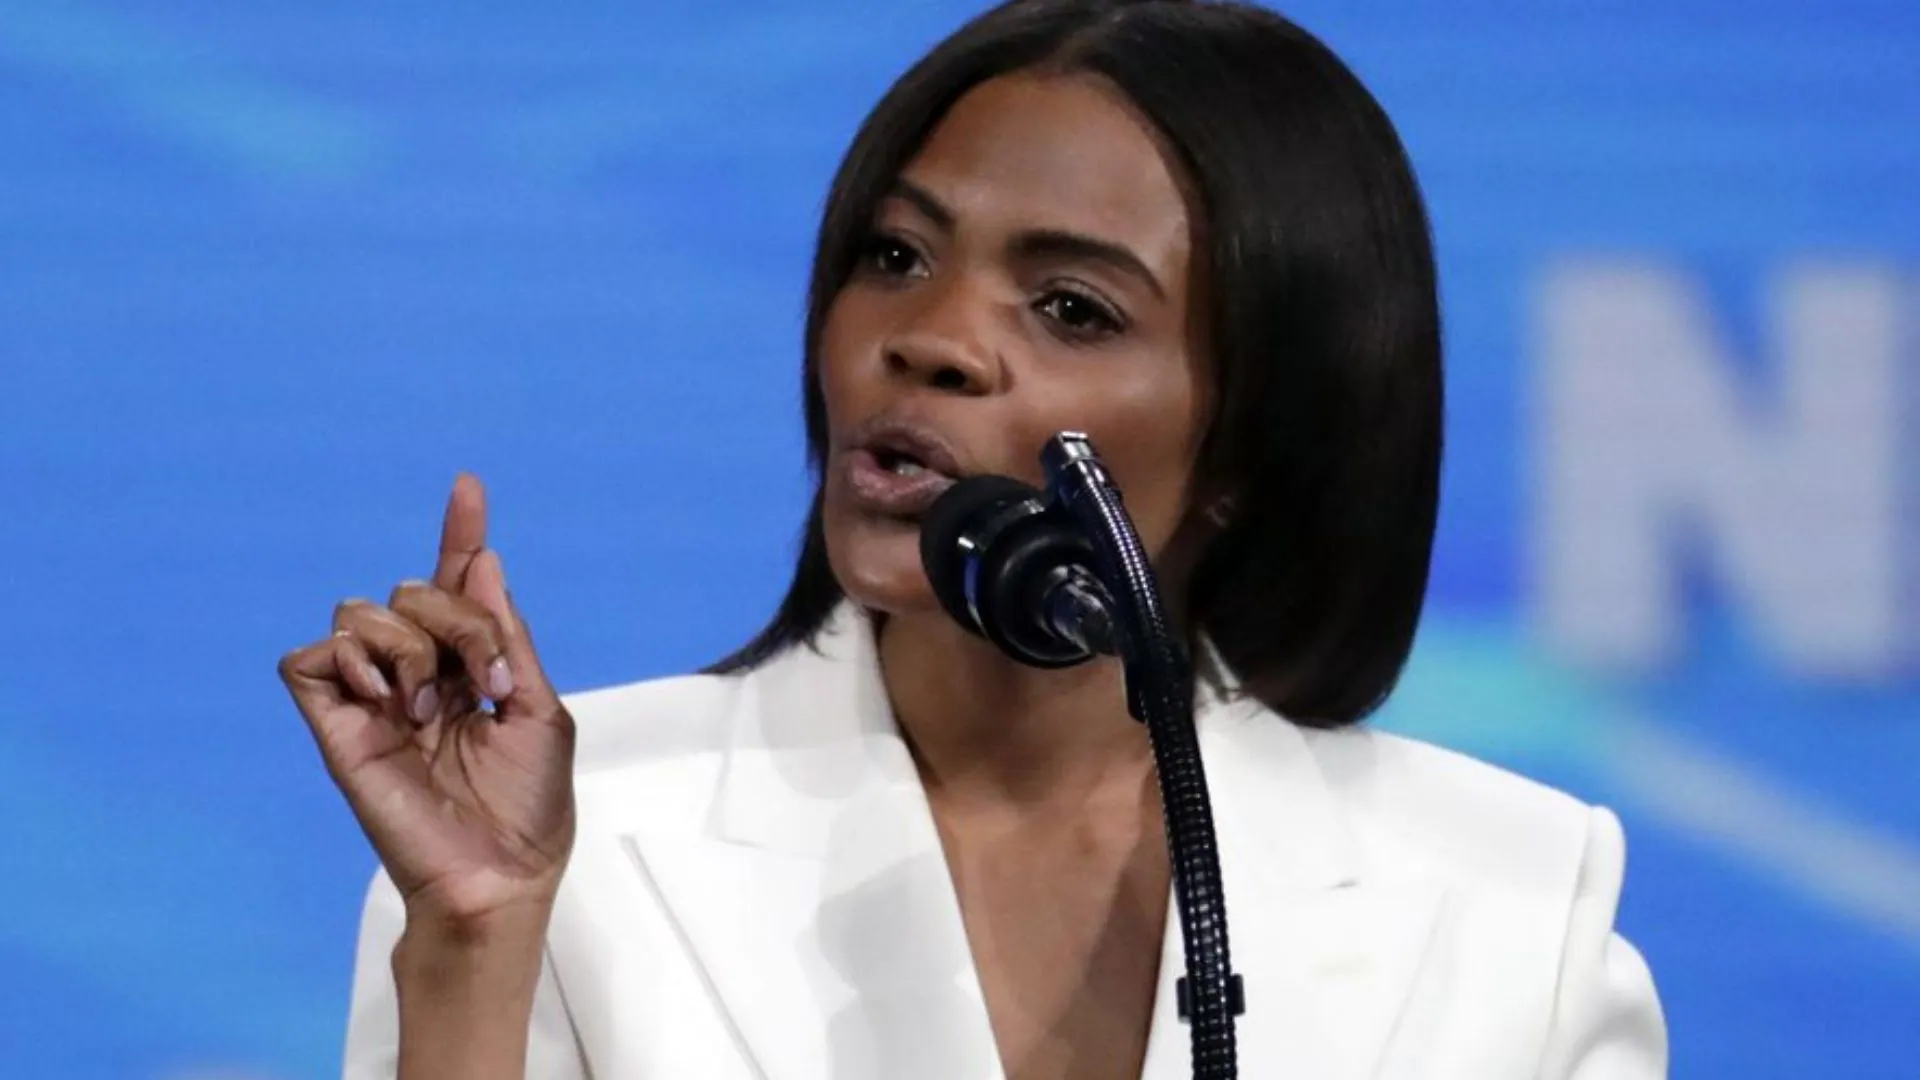 Supreme Court rejects Candace Owens’ ‘fact check’ lawsuit over COVID-19 claims